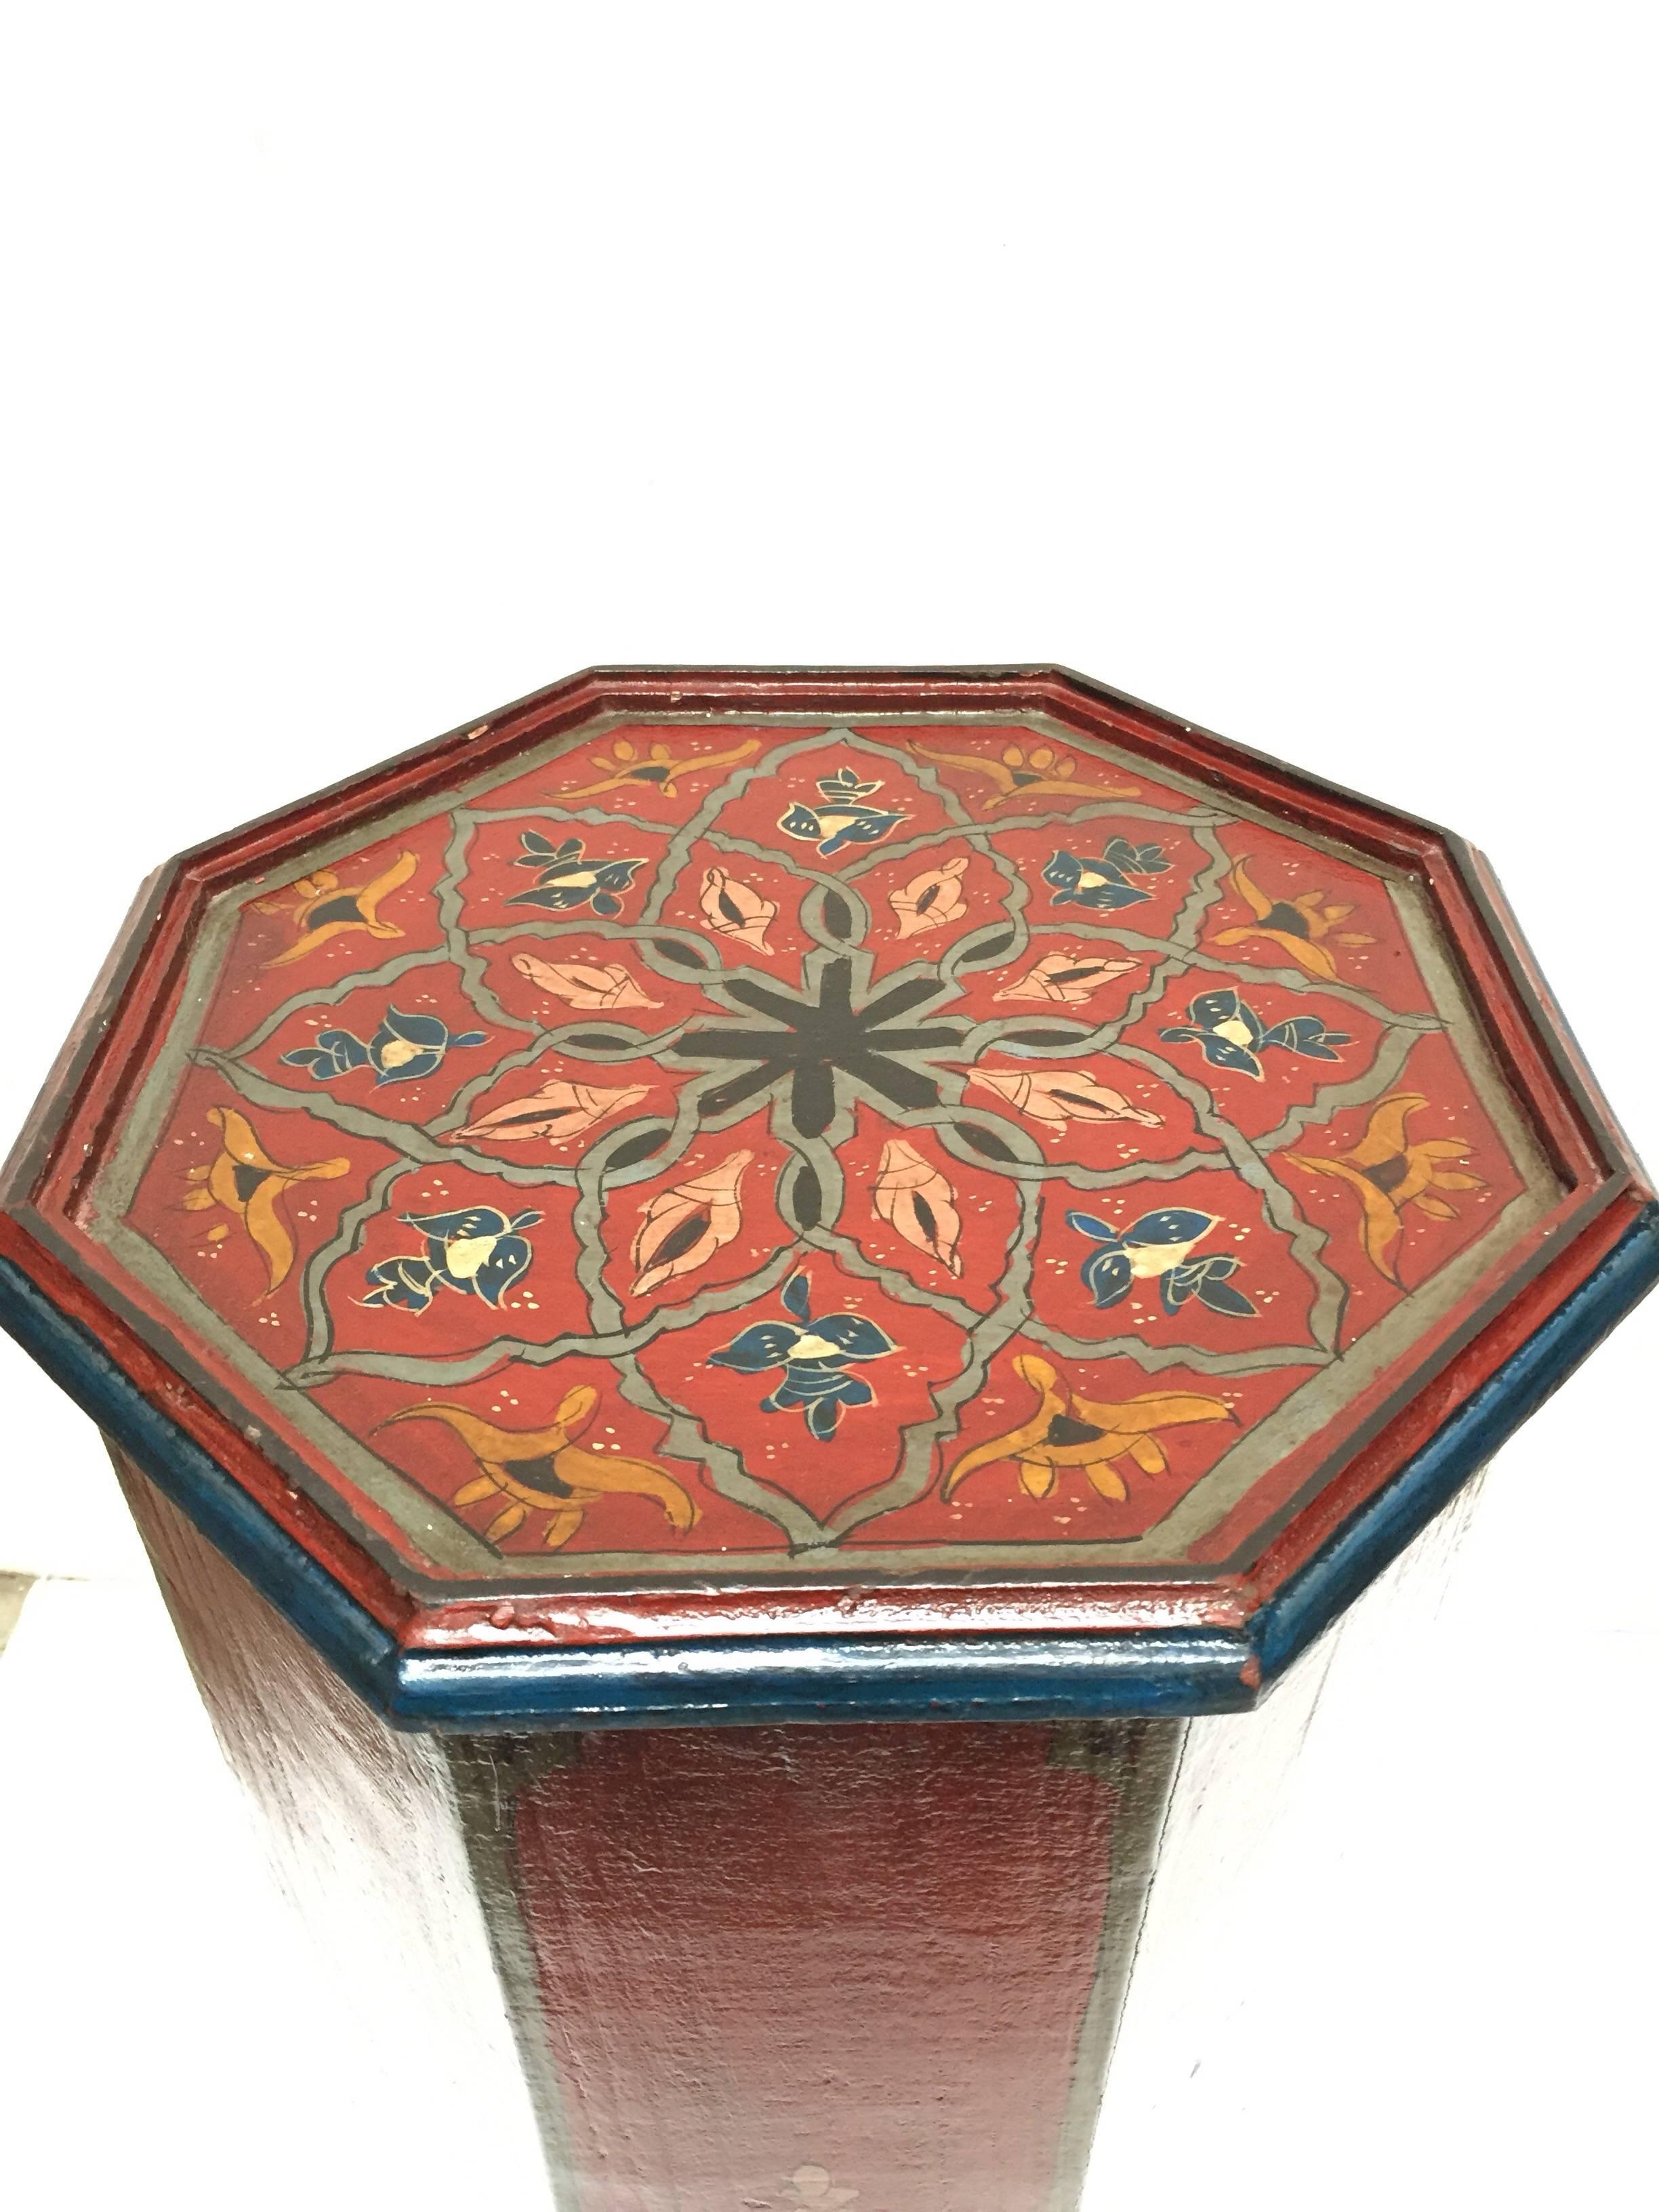 Moroccan vintage pedestal table, hand-painted on a dark maroon background color with floral and geometric designs in blue and yellow colors.
Moorish arches on the base of these octagonal shape table.
African folk Art handcrafted by skilled artisans